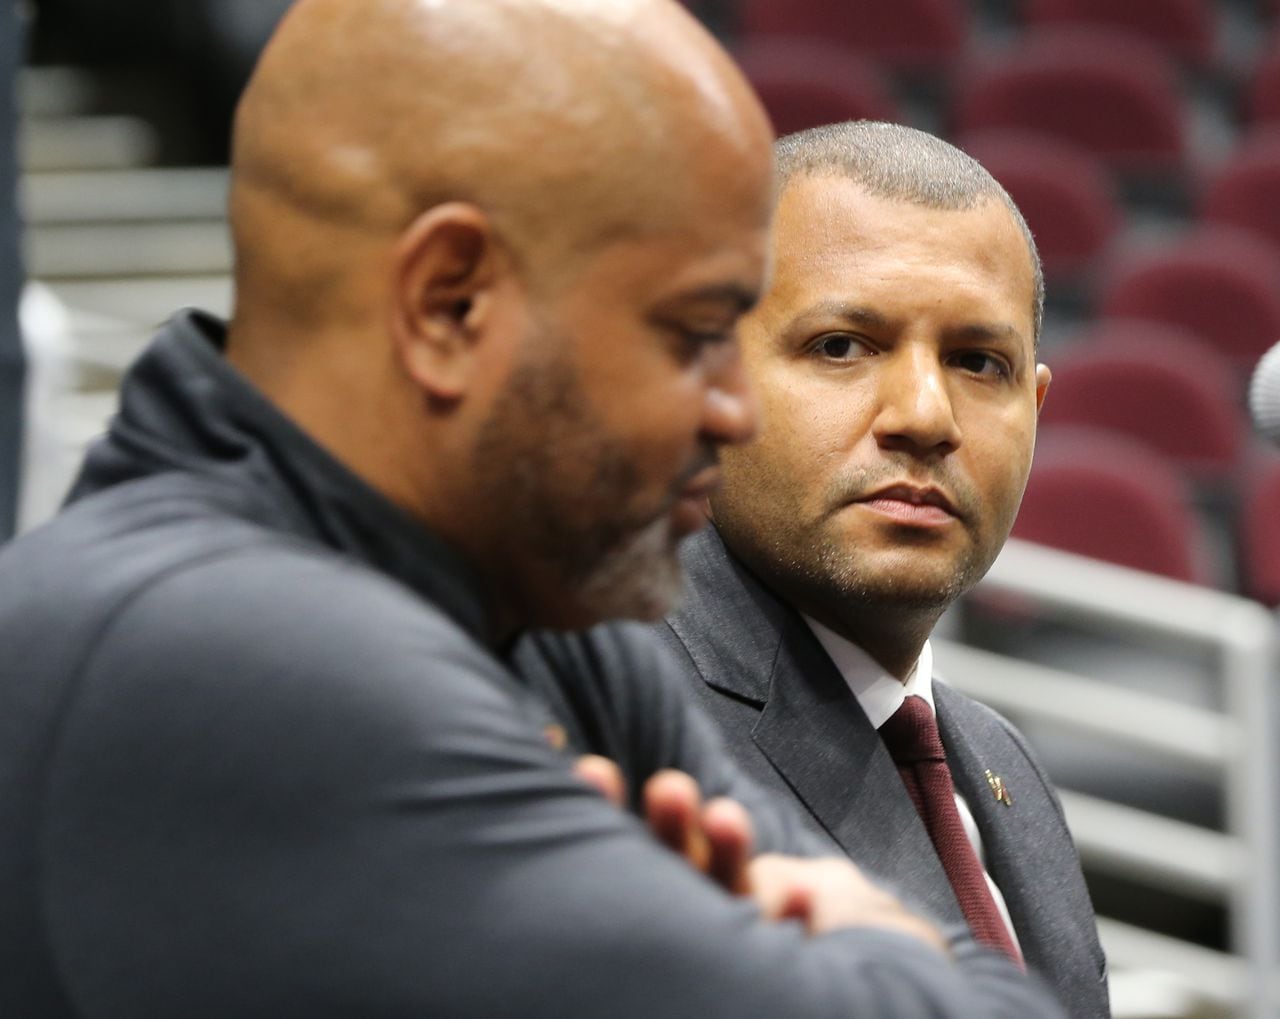 History suggests Cavs coach J.B. Bickerstaff is on a short leash to win big  after playoff loss to Knicks: Jimmy Watkins - cleveland.com